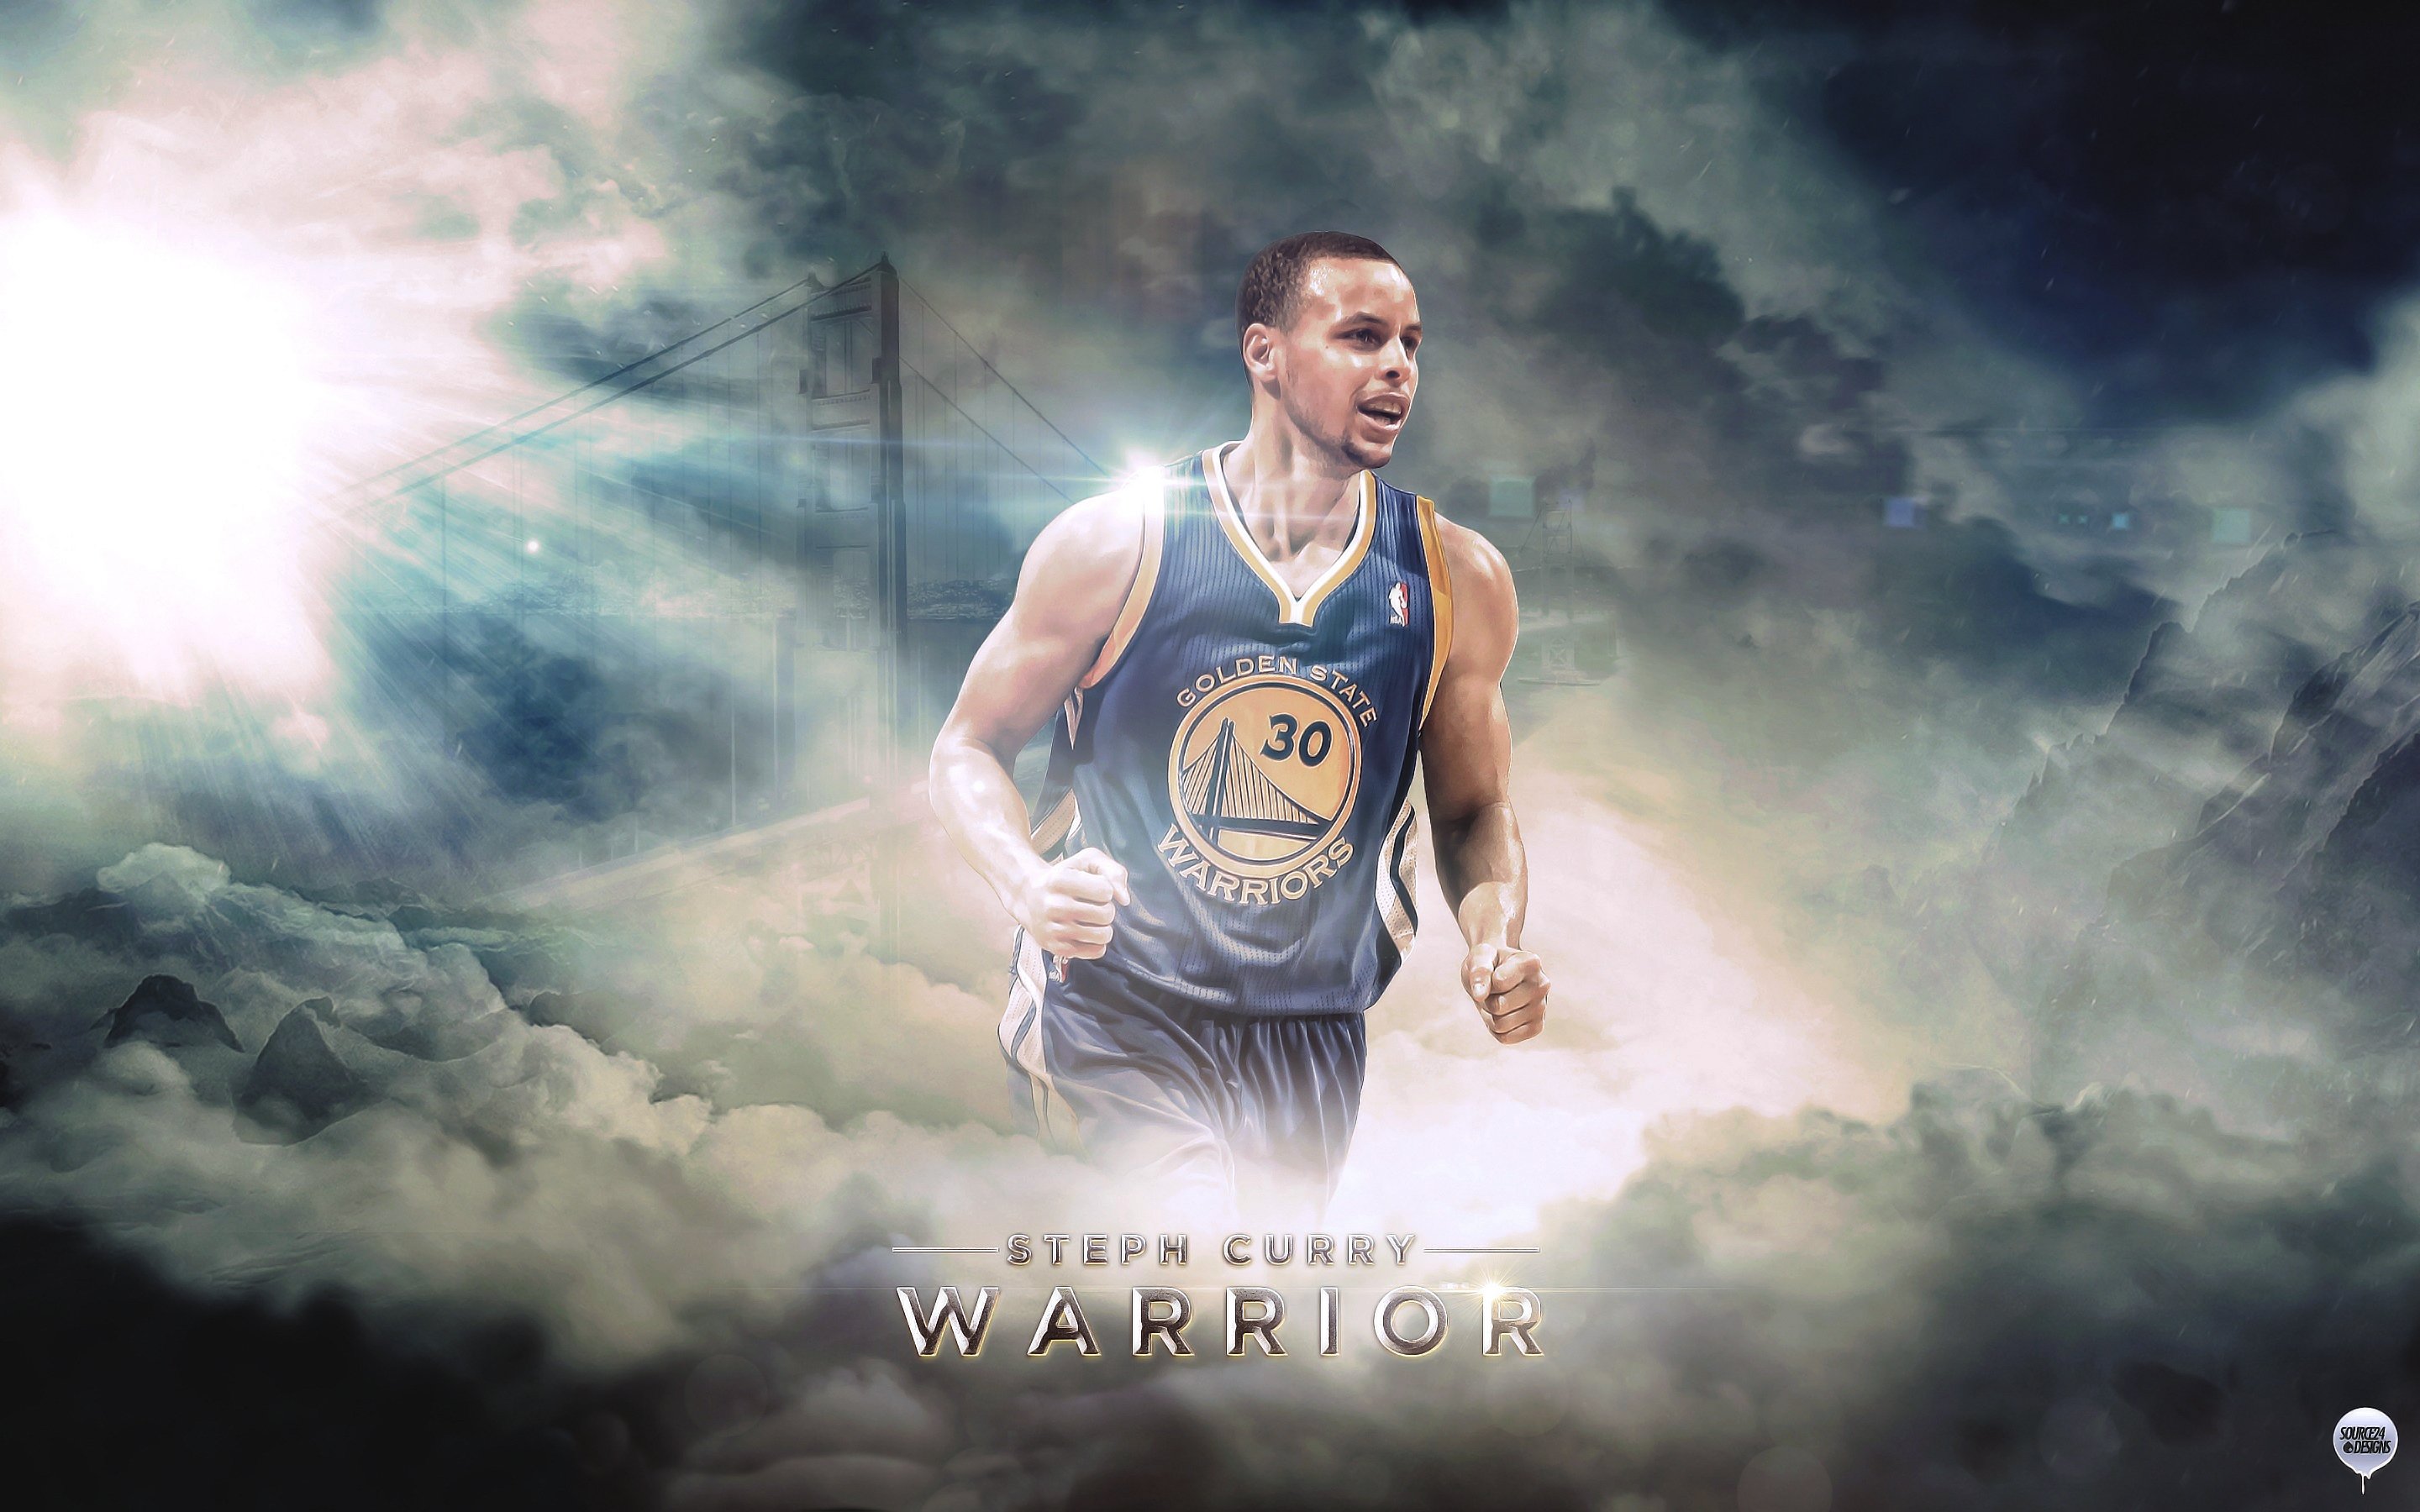 Curry 4K wallpaper for your desktop or mobile screen free and easy to download